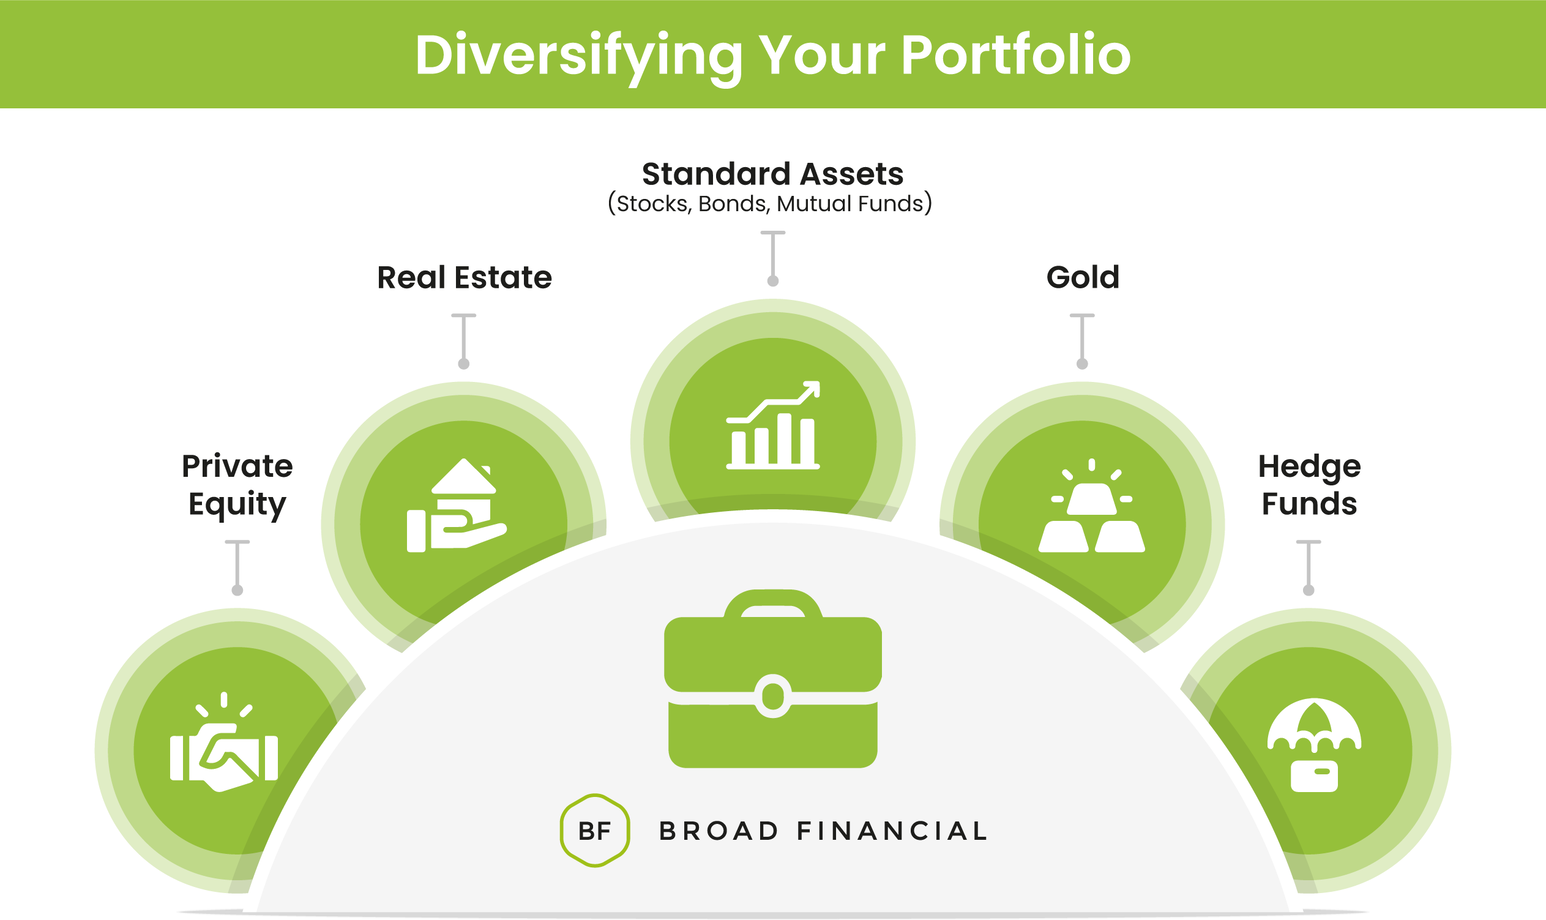 Infographic of a diversified portfolio with private equity, real estate, standard assets (stocks, bonds, mutual funds), gold, and hedge funds.  